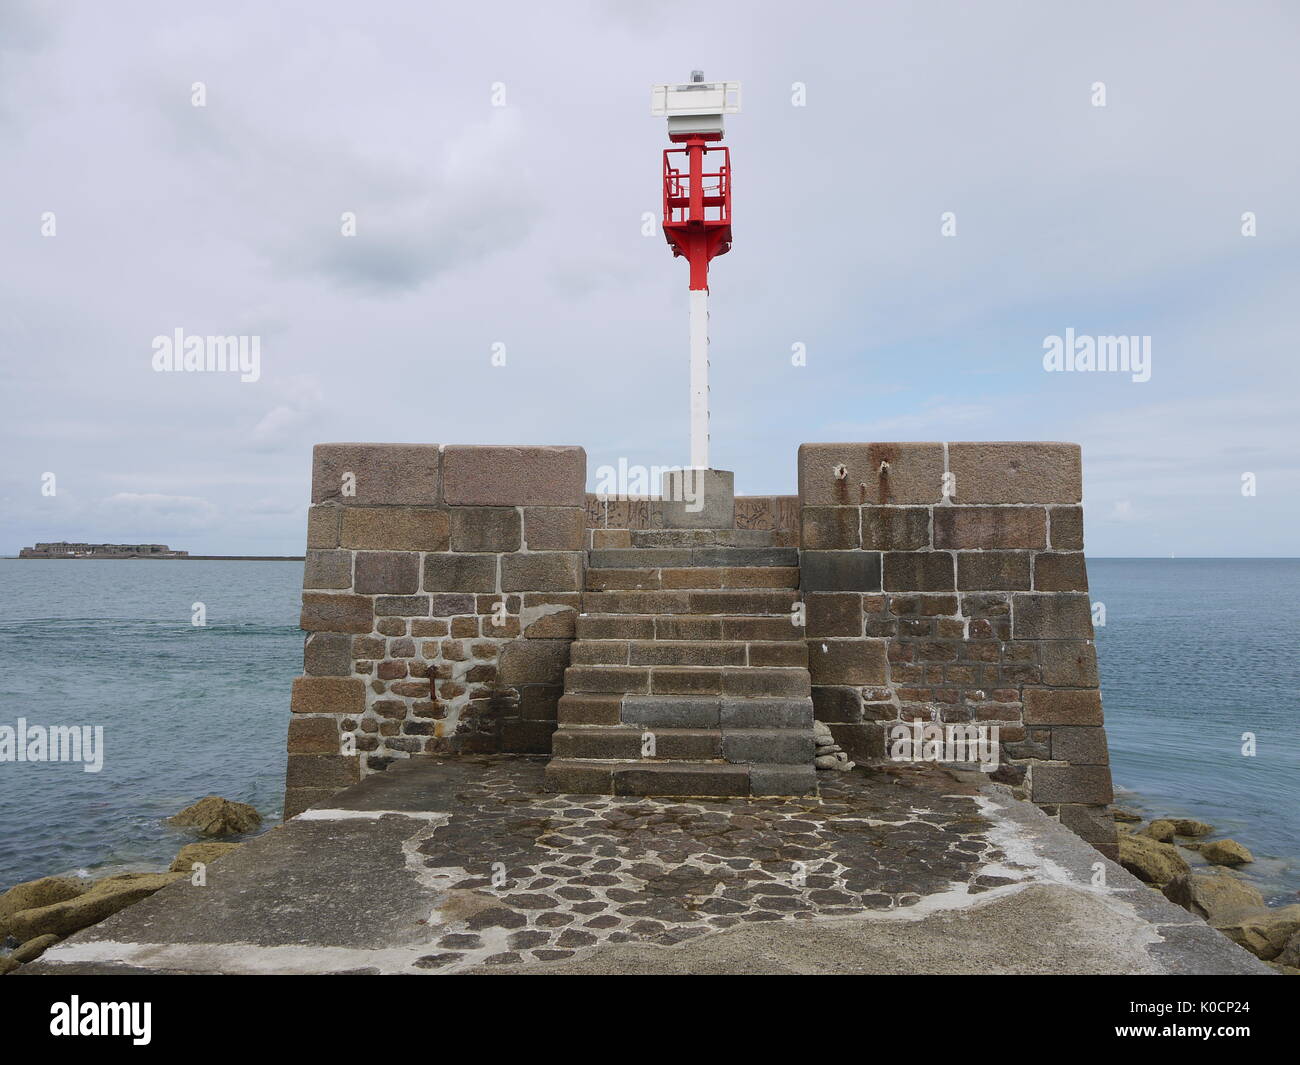 A maritime beacon on the wavebreaker of the port of Cherbourg Stock Photo